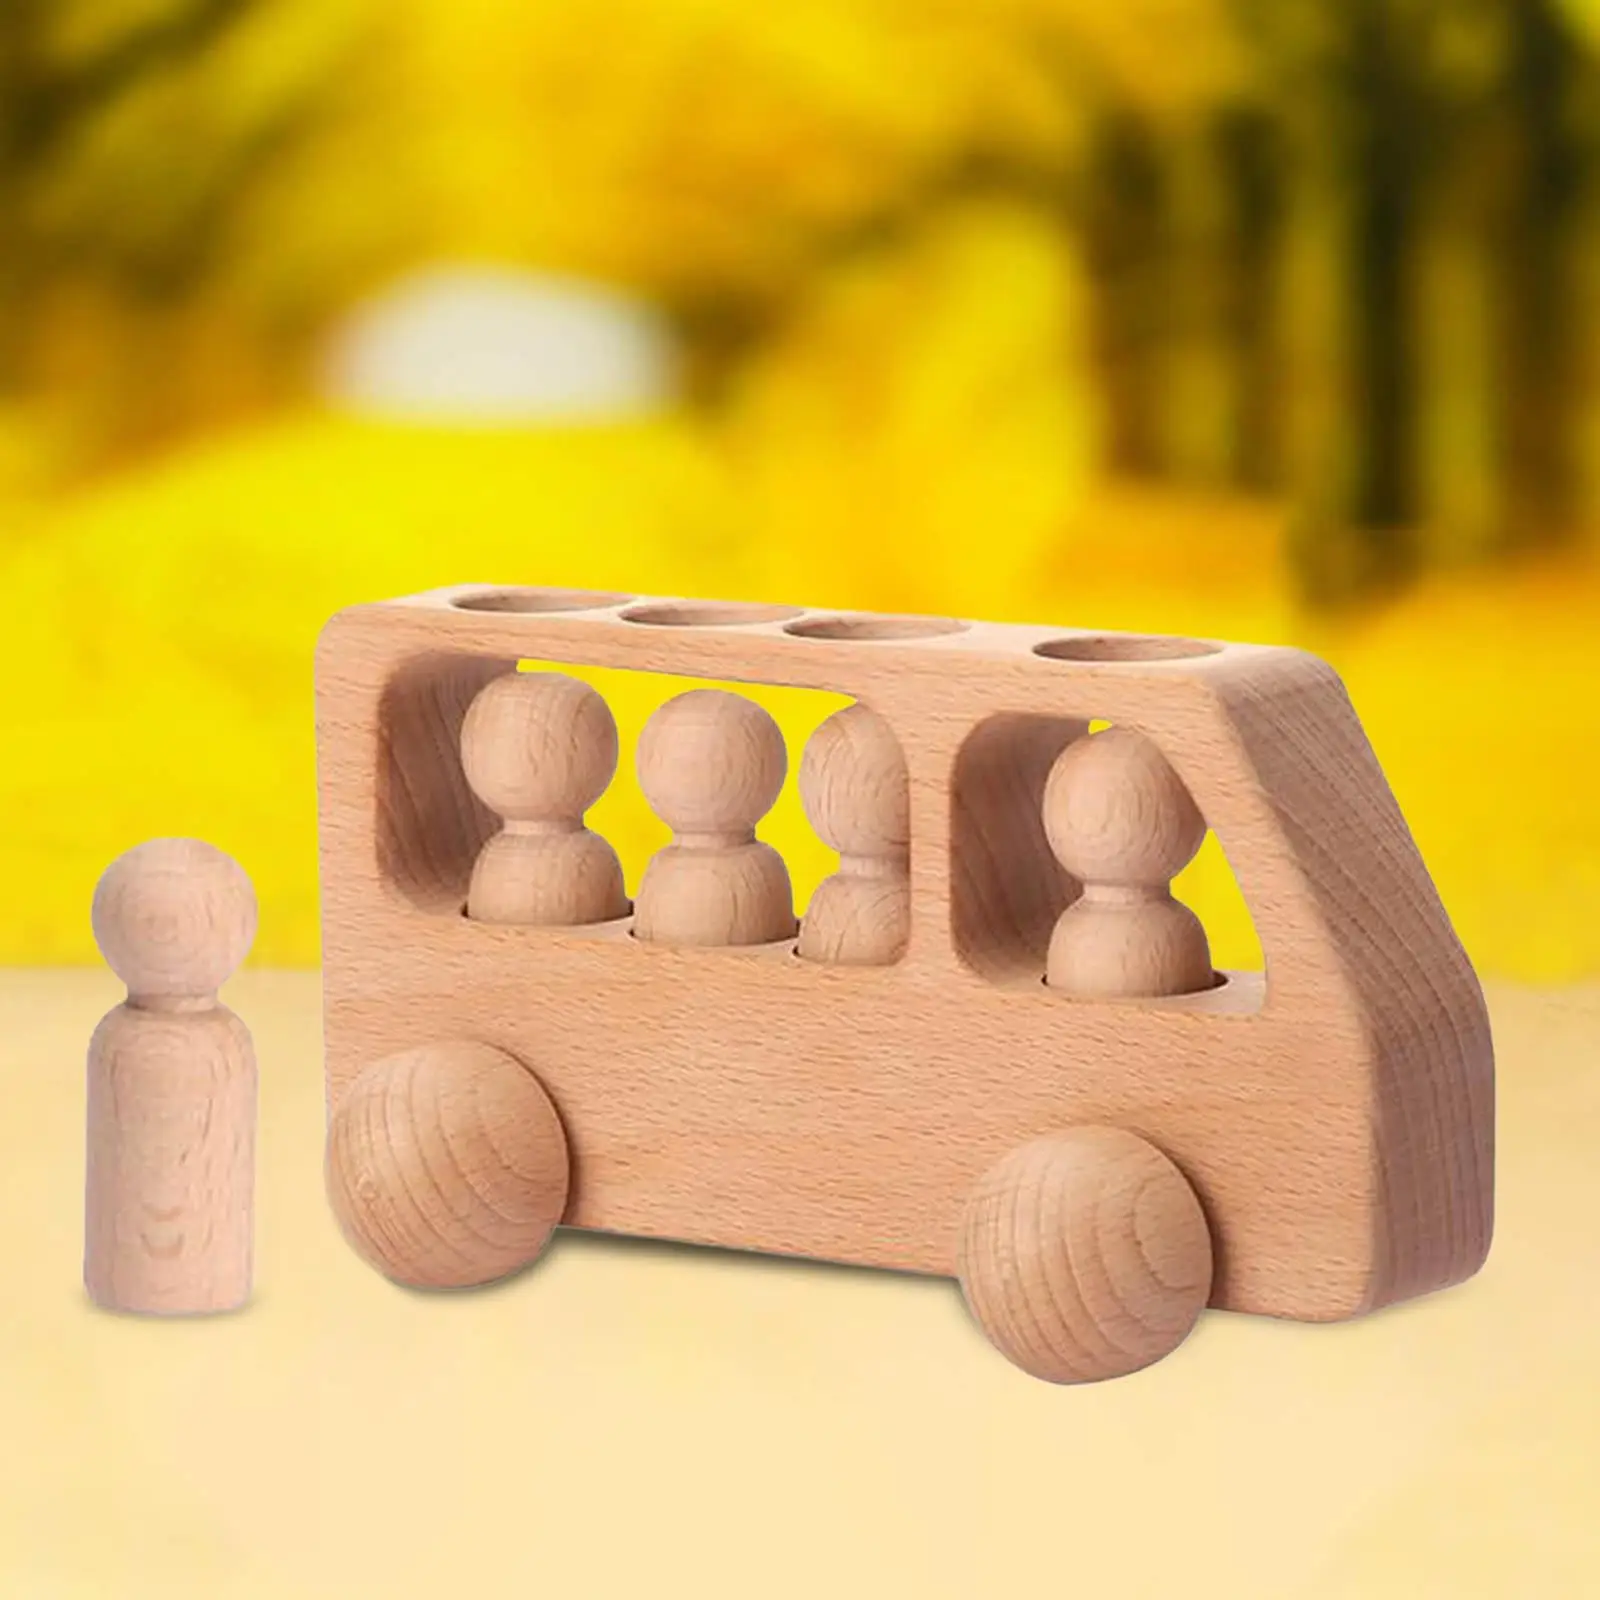 Montessori Wooden Bus Toy Learning Educational Toy Peg Dolls Playset Develop Fine Motor Skills for Preschool Toddler Kids Gifts